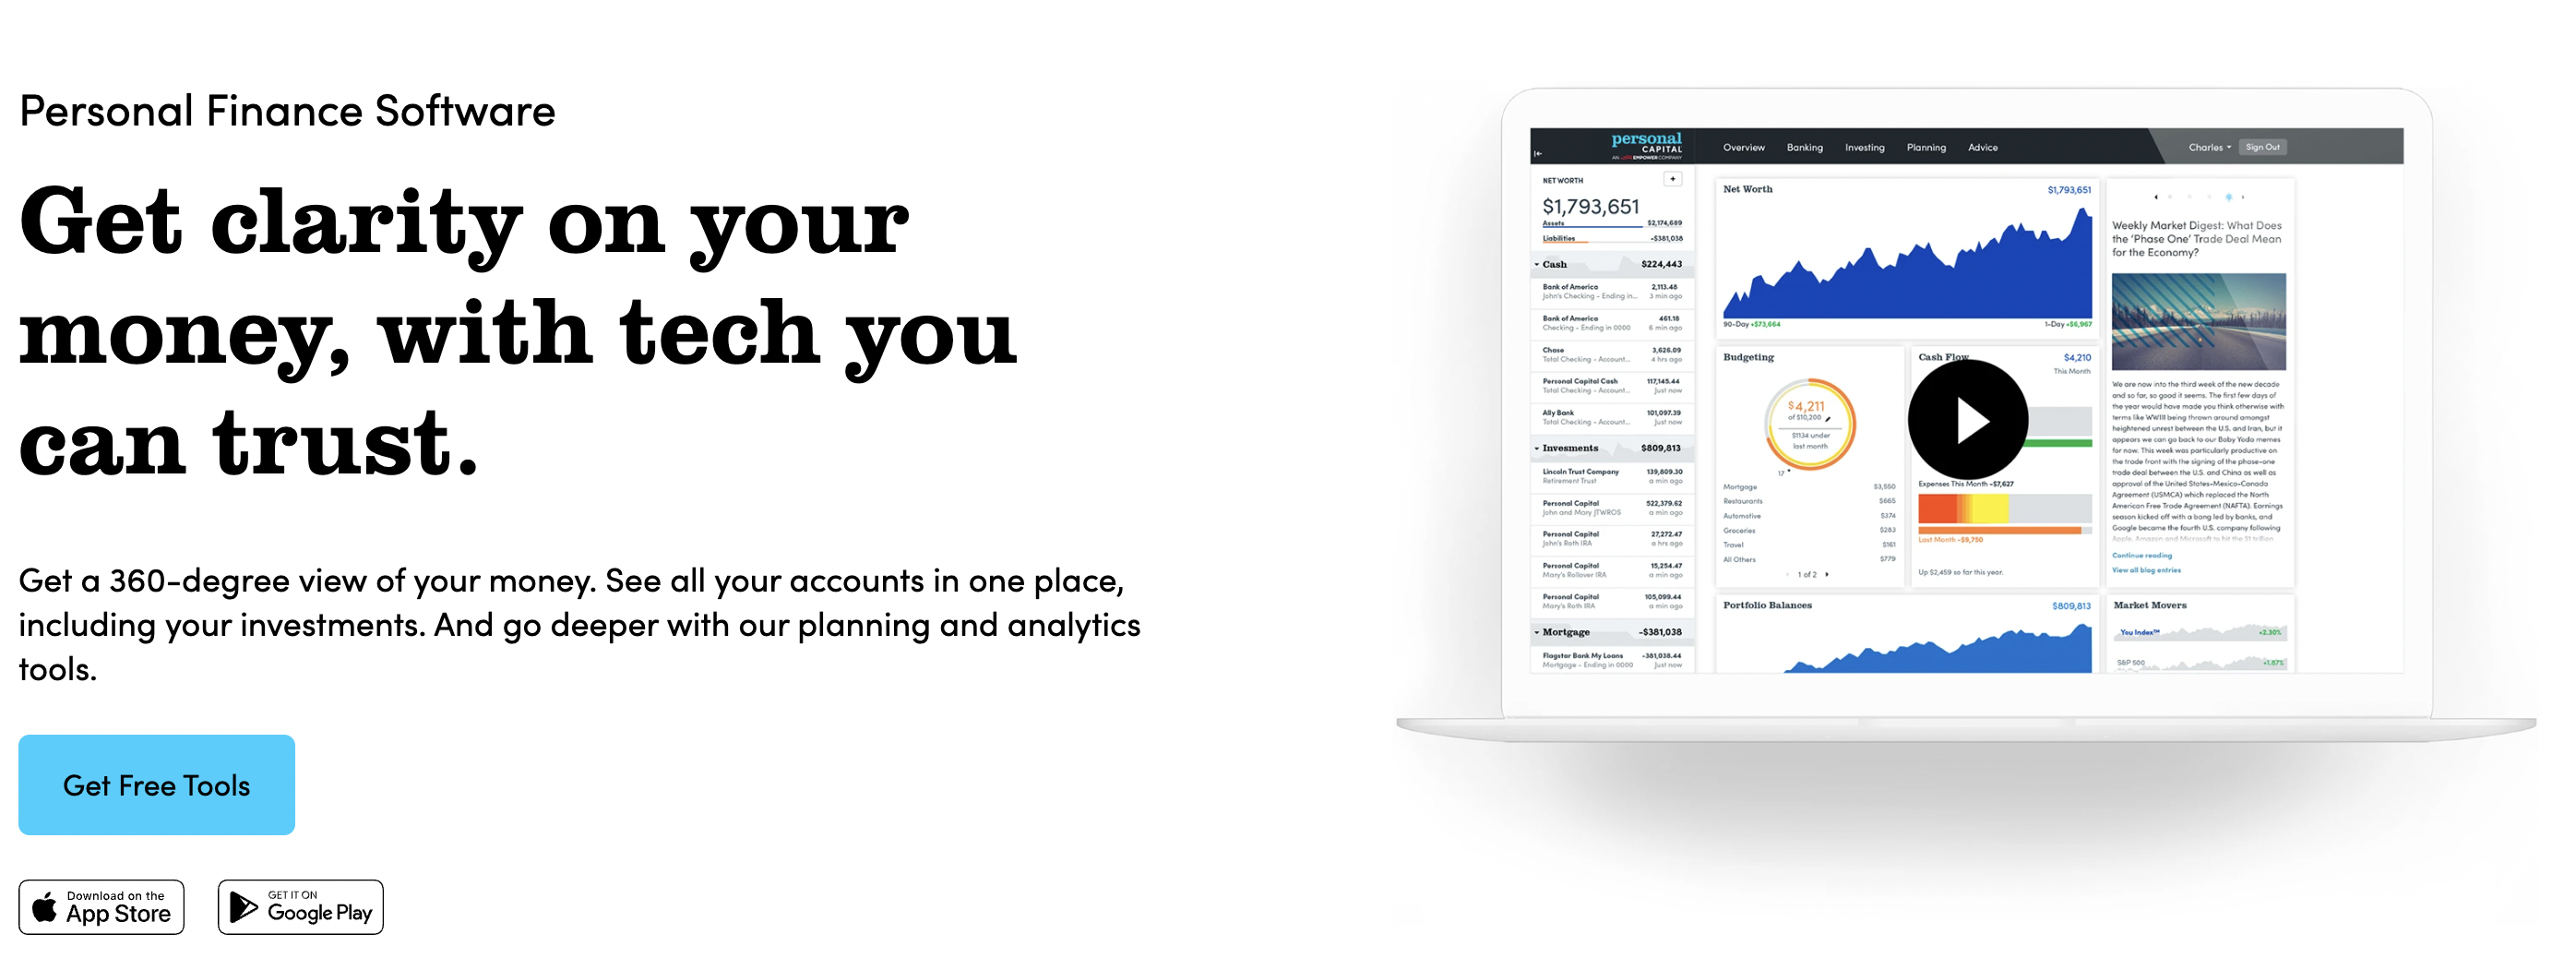 Get a 360-degree view of your money. See all your accounts in one place, including your investments. And go deeper with our planning and analytics tools